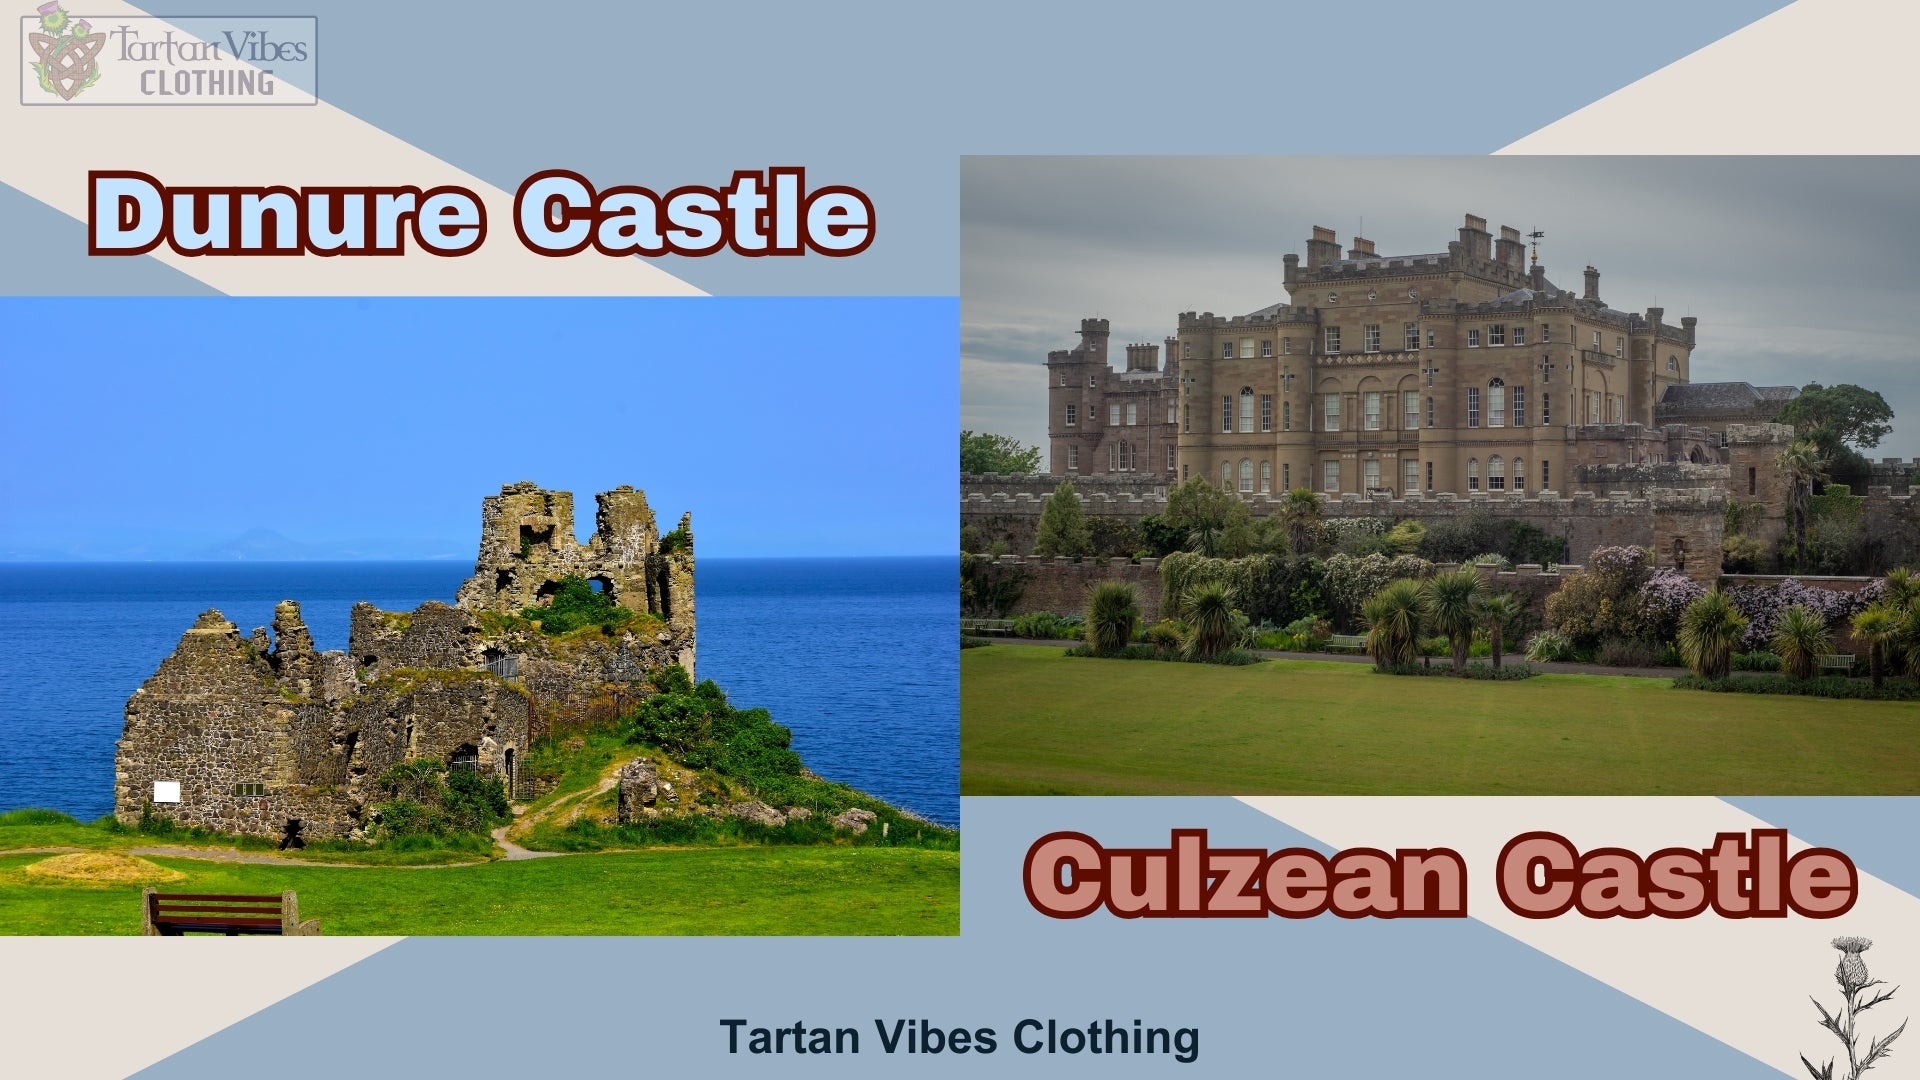 Dunure Castle left and Culzean Castle right - History seat of Kennedy Clan